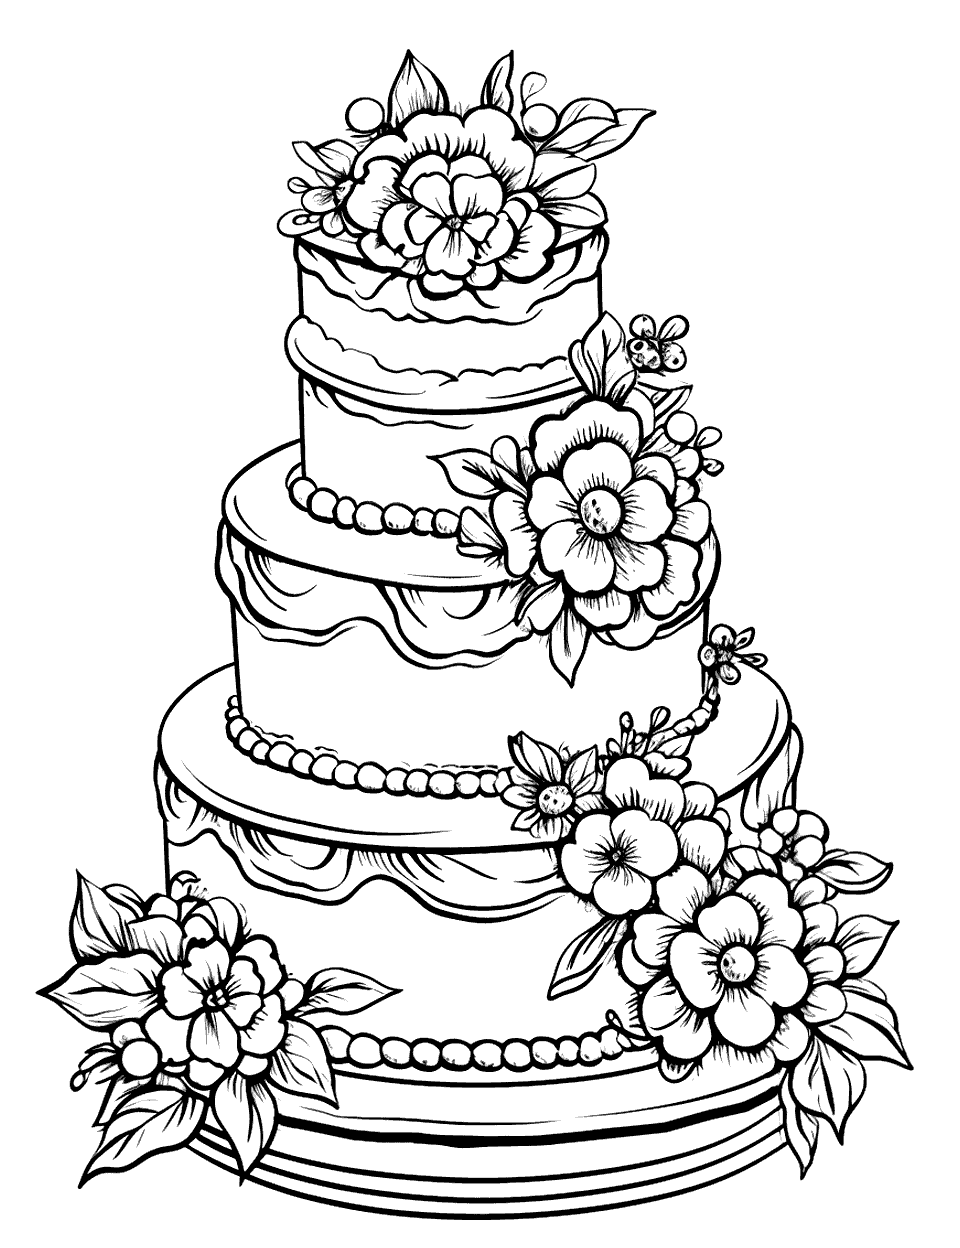 Wedding Bliss Cake Coloring Page - A tall, elegant wedding cake adorned with flowers.